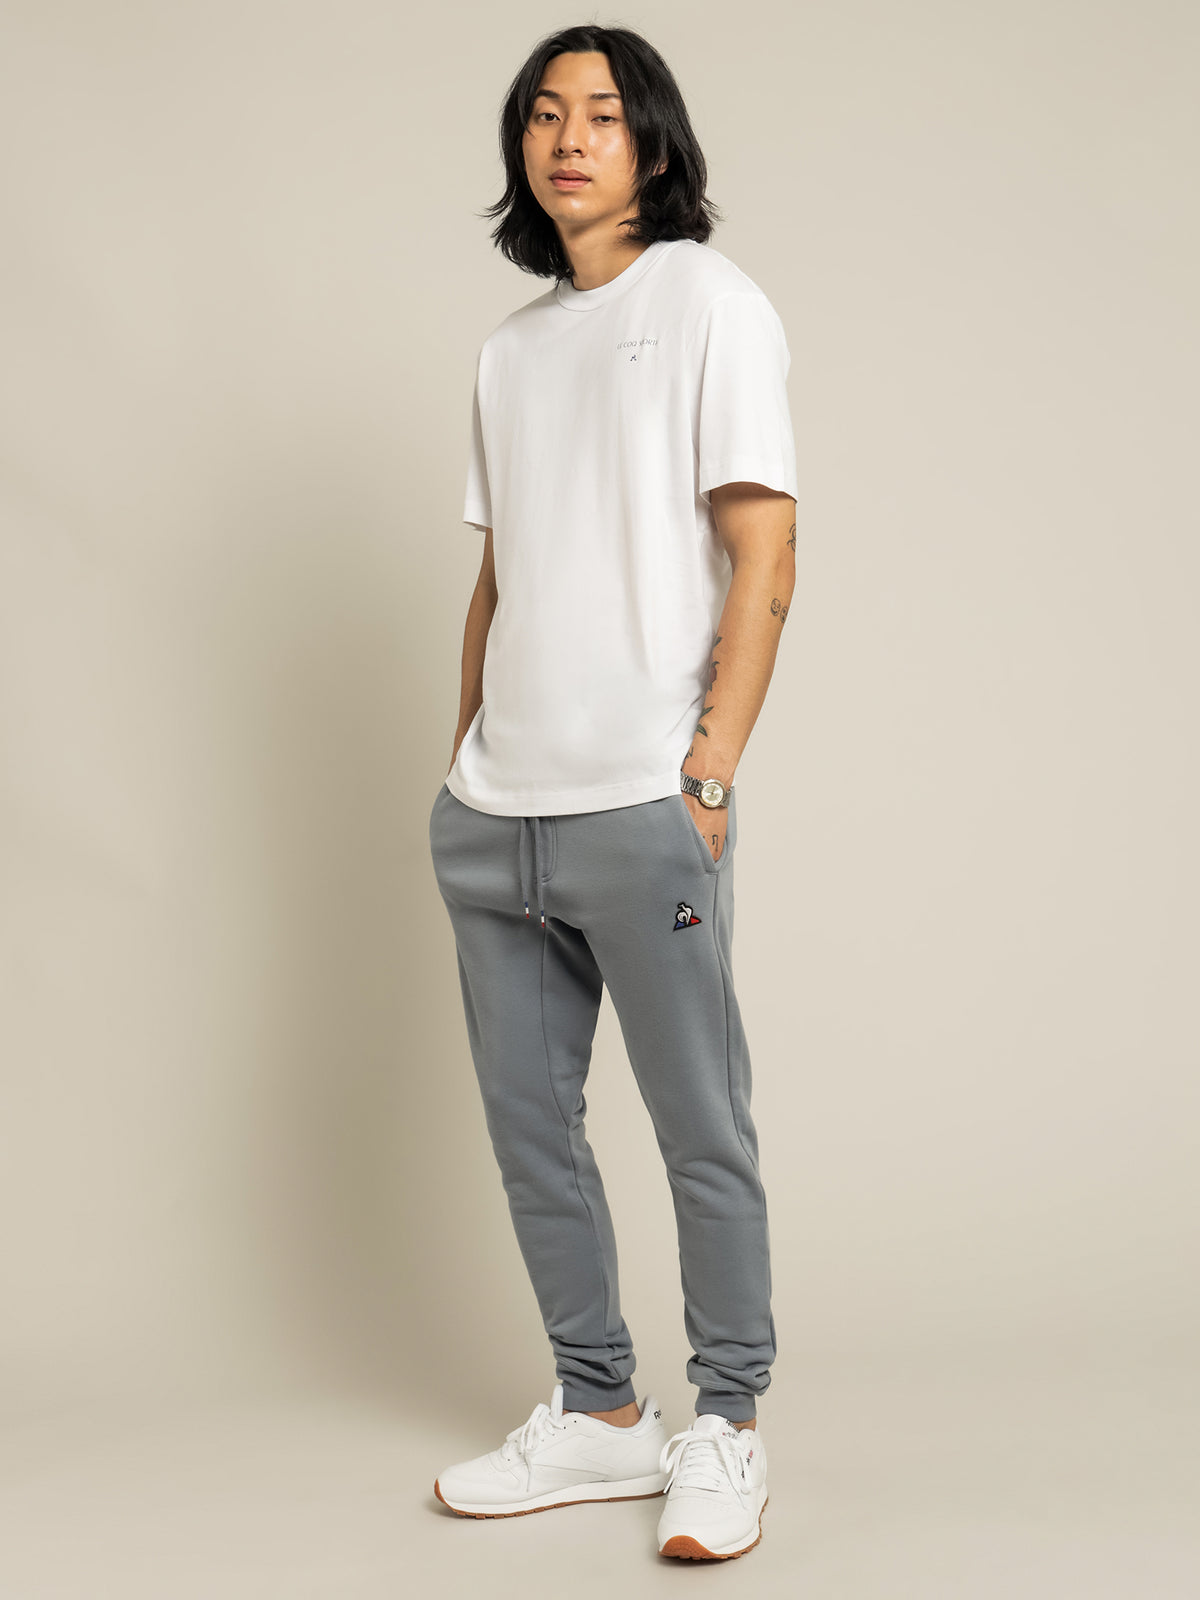 Blaise Trackpants in Washed Blue